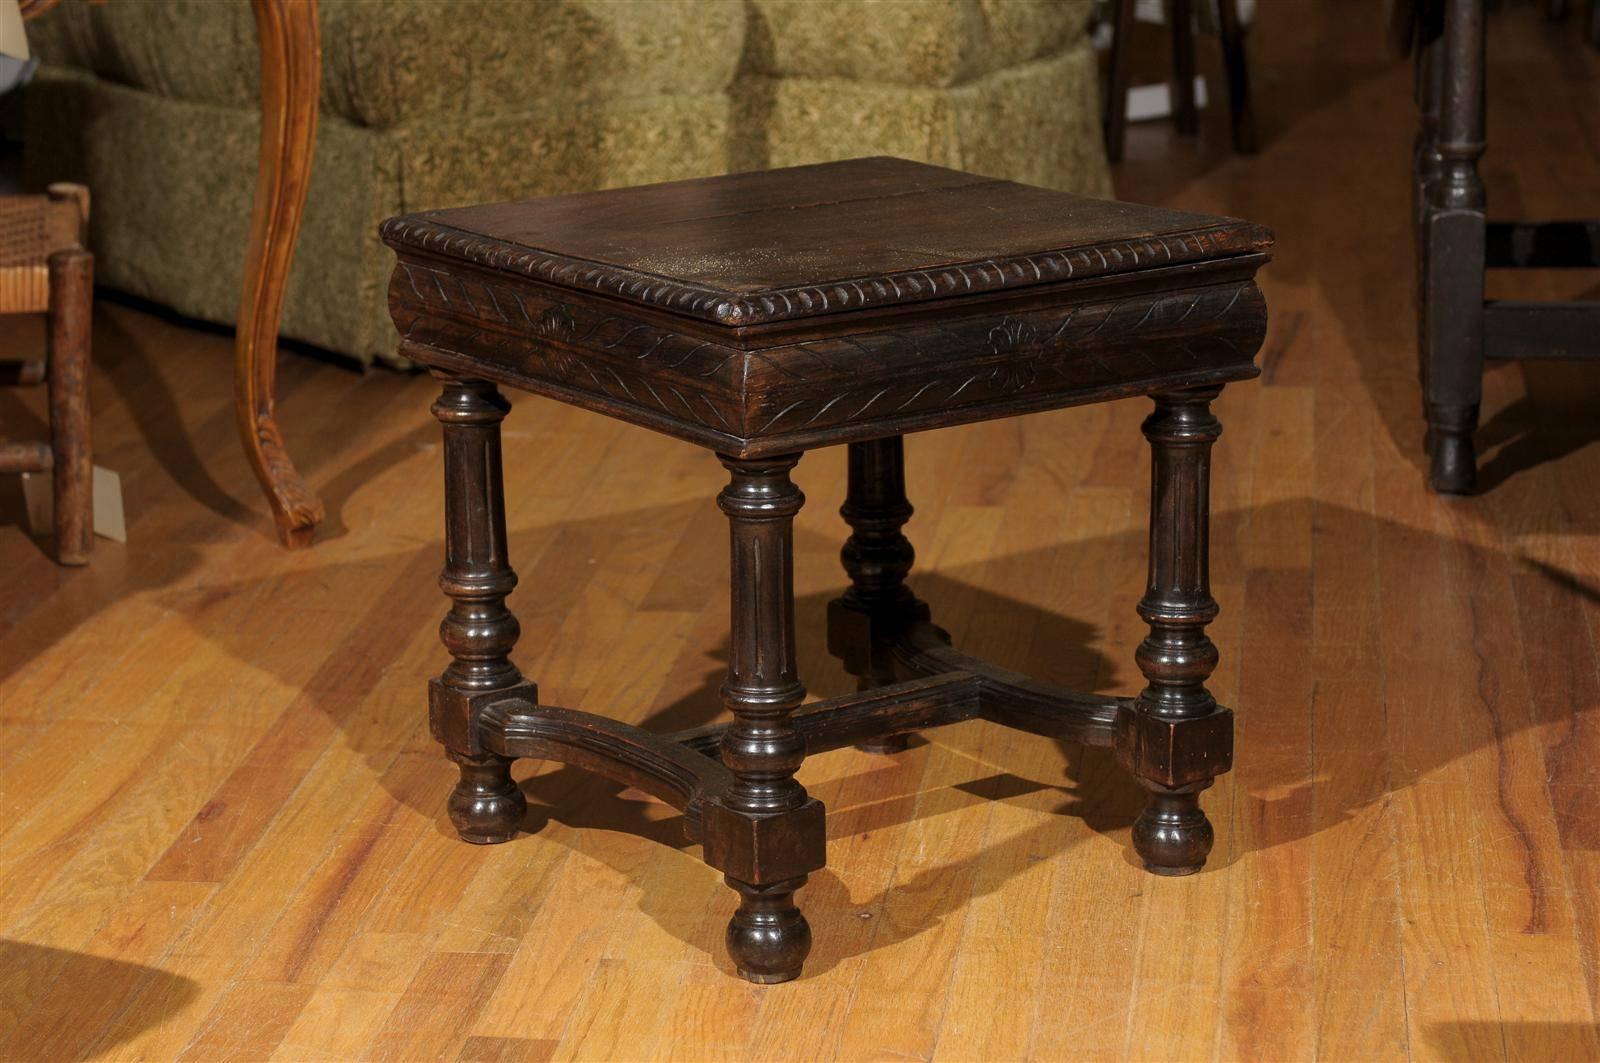 This English, 19th century, wooden stool has a solid wooden top and turned legs. There are incising marks on the ogee edge and also on the apron. This stool would be great in front of your fireplace or as a table beside your chair.

